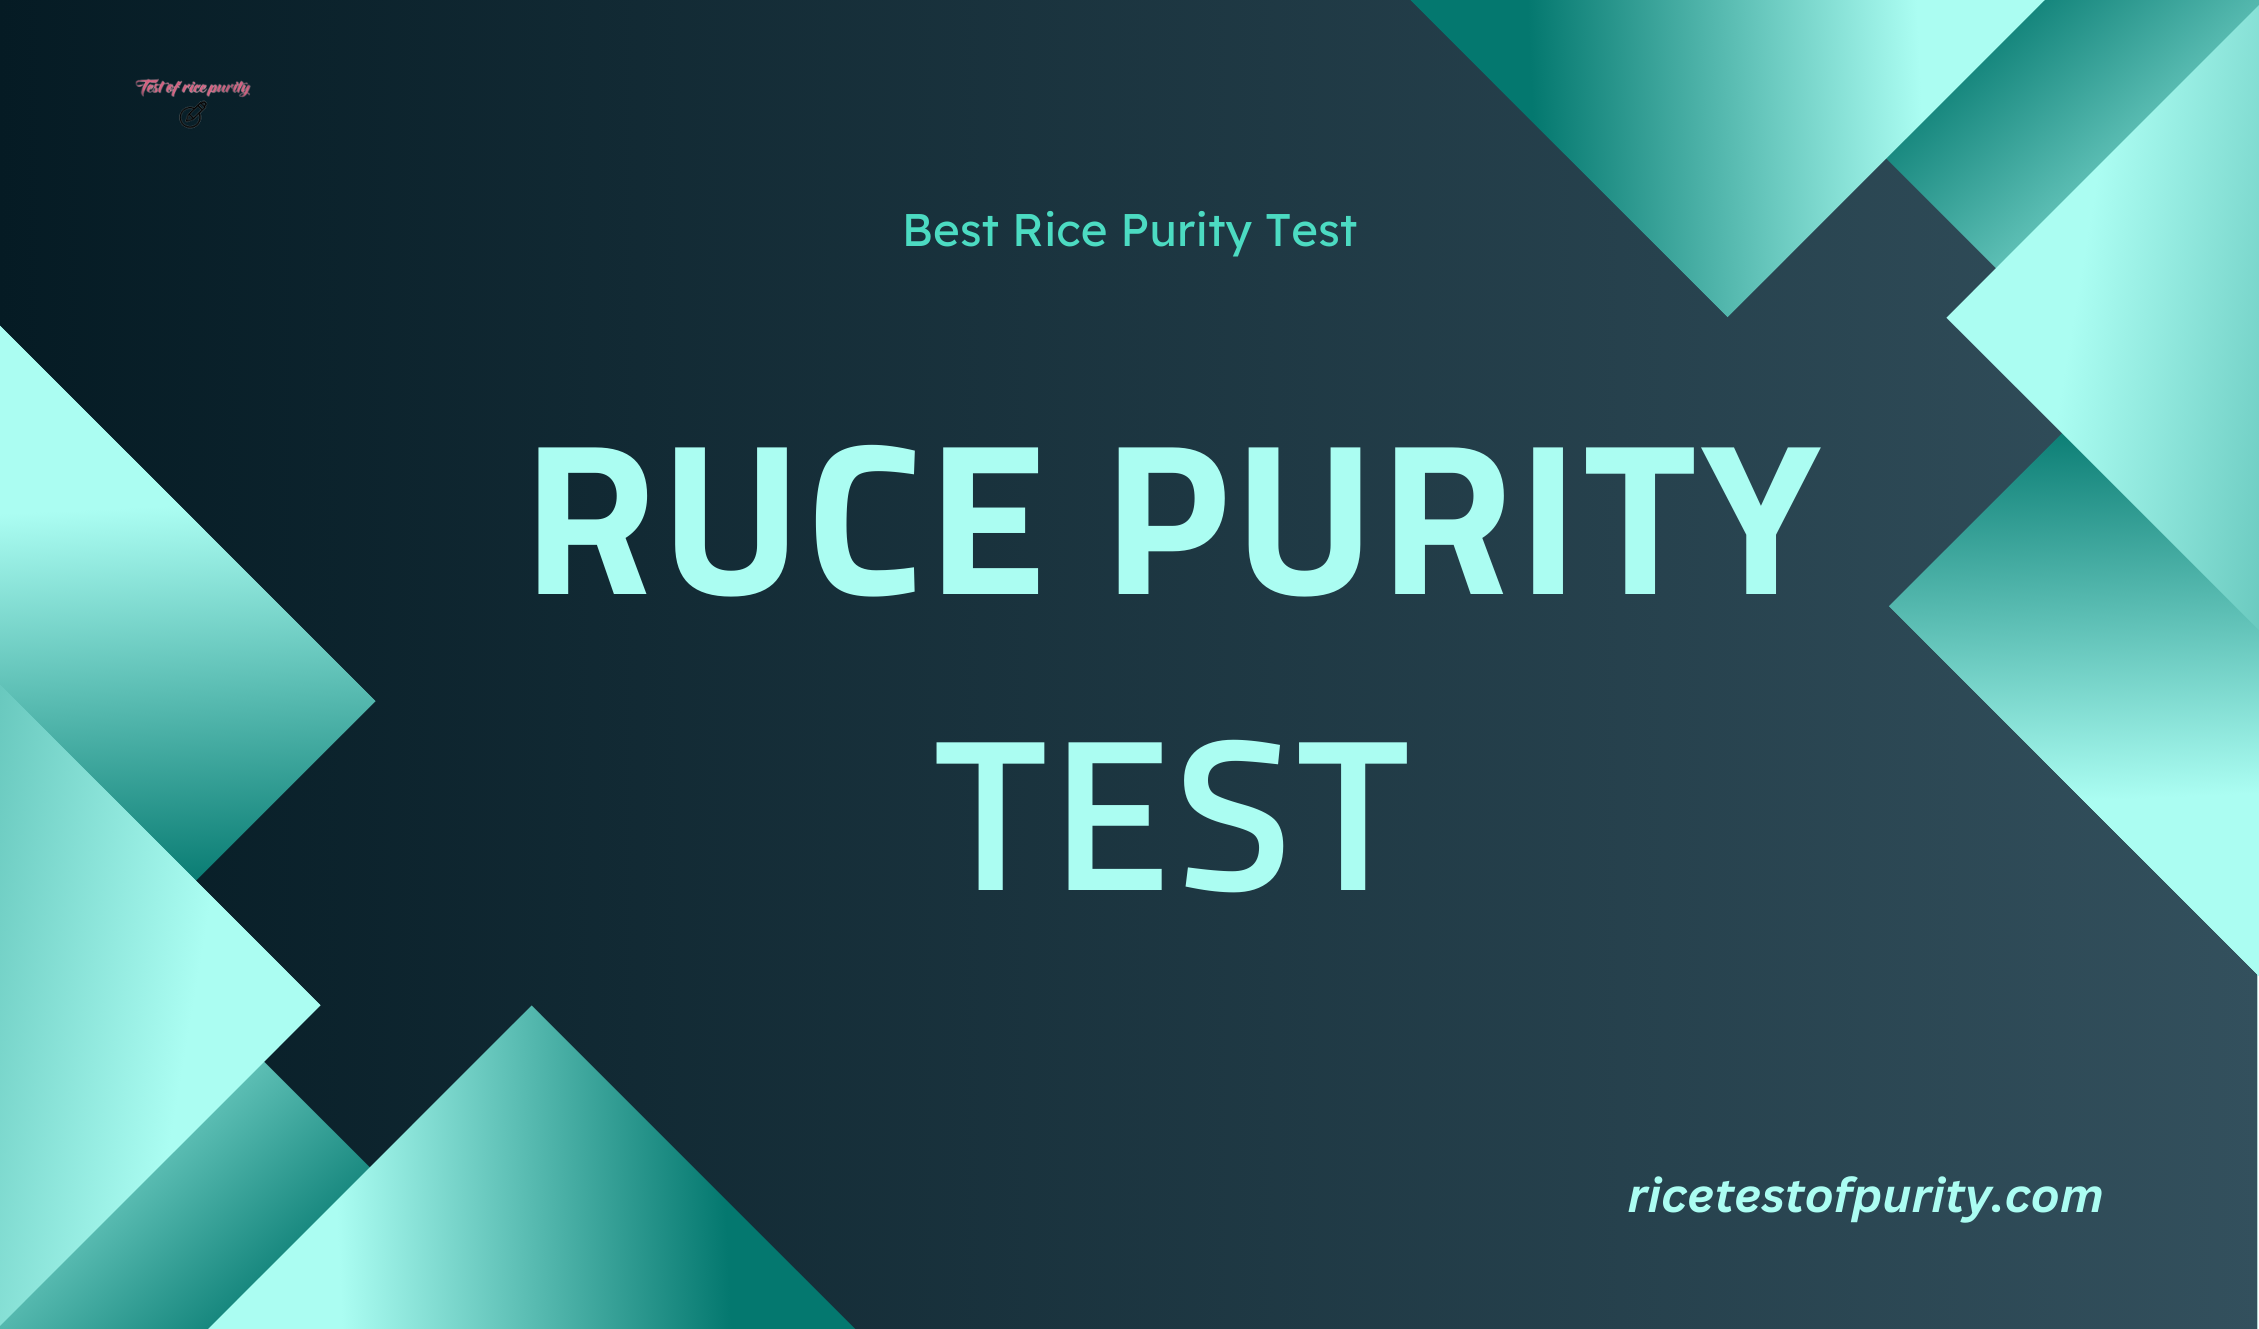 Ruce Purity Test